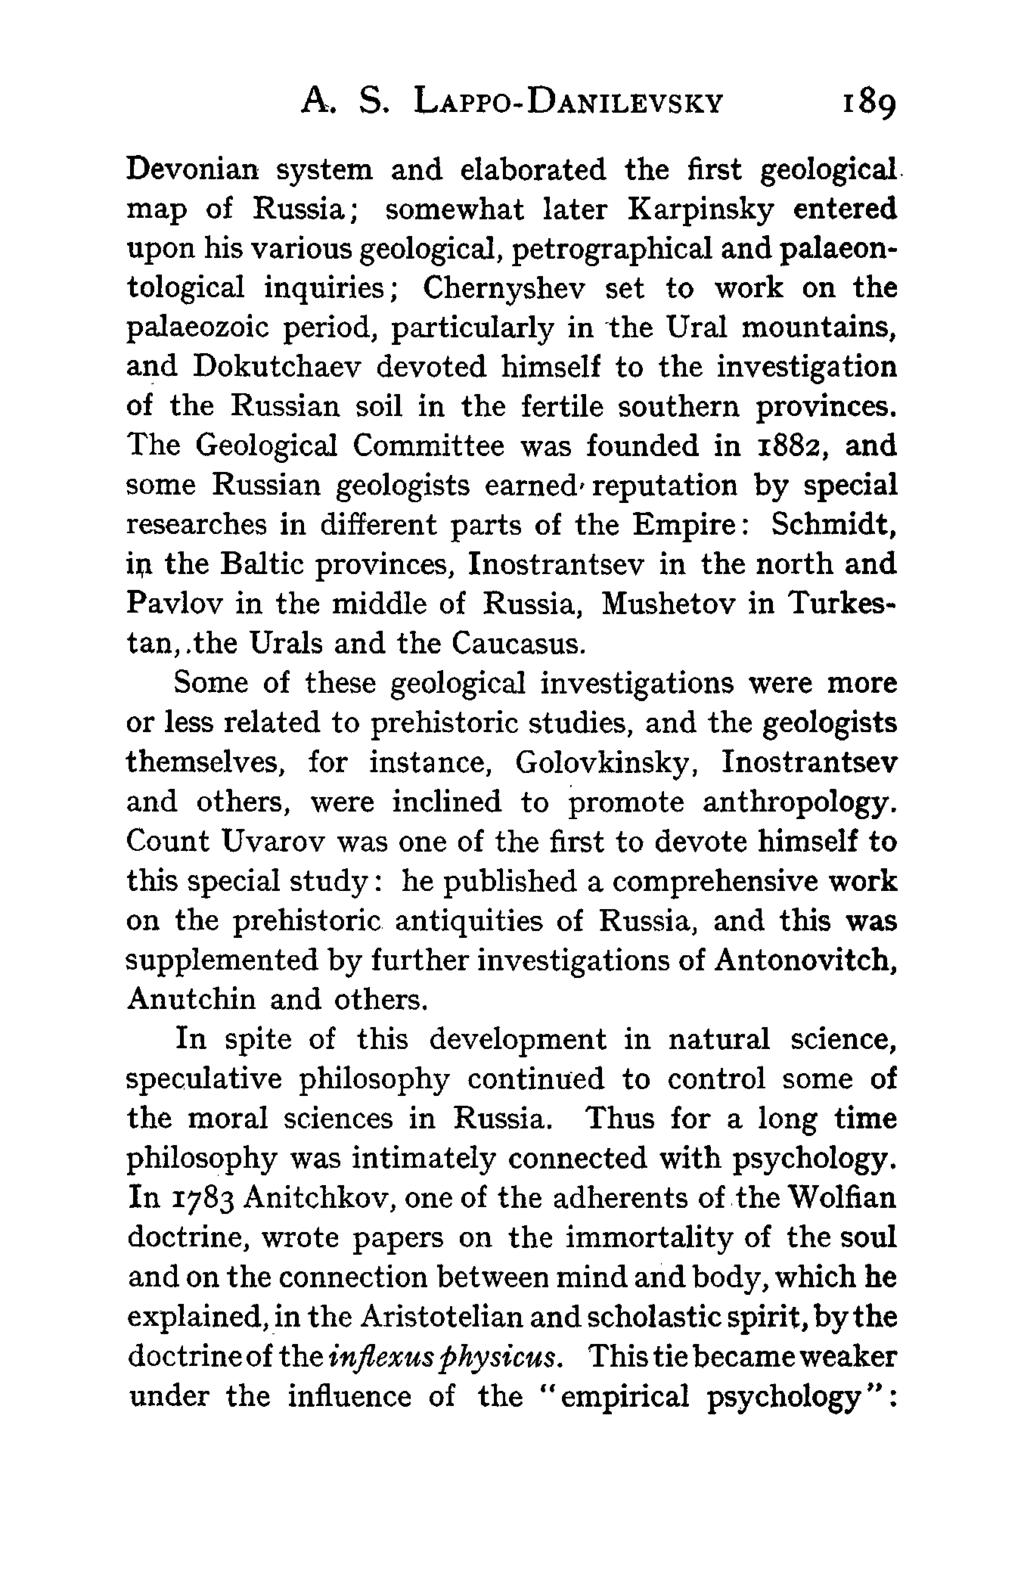 A. S. LAPPO-DANILEVSKY 189 Devonian system and elaborated the first geological map of Russia; somewhat later Karpinsky entered upon his various geological, petrographical and palaeontological